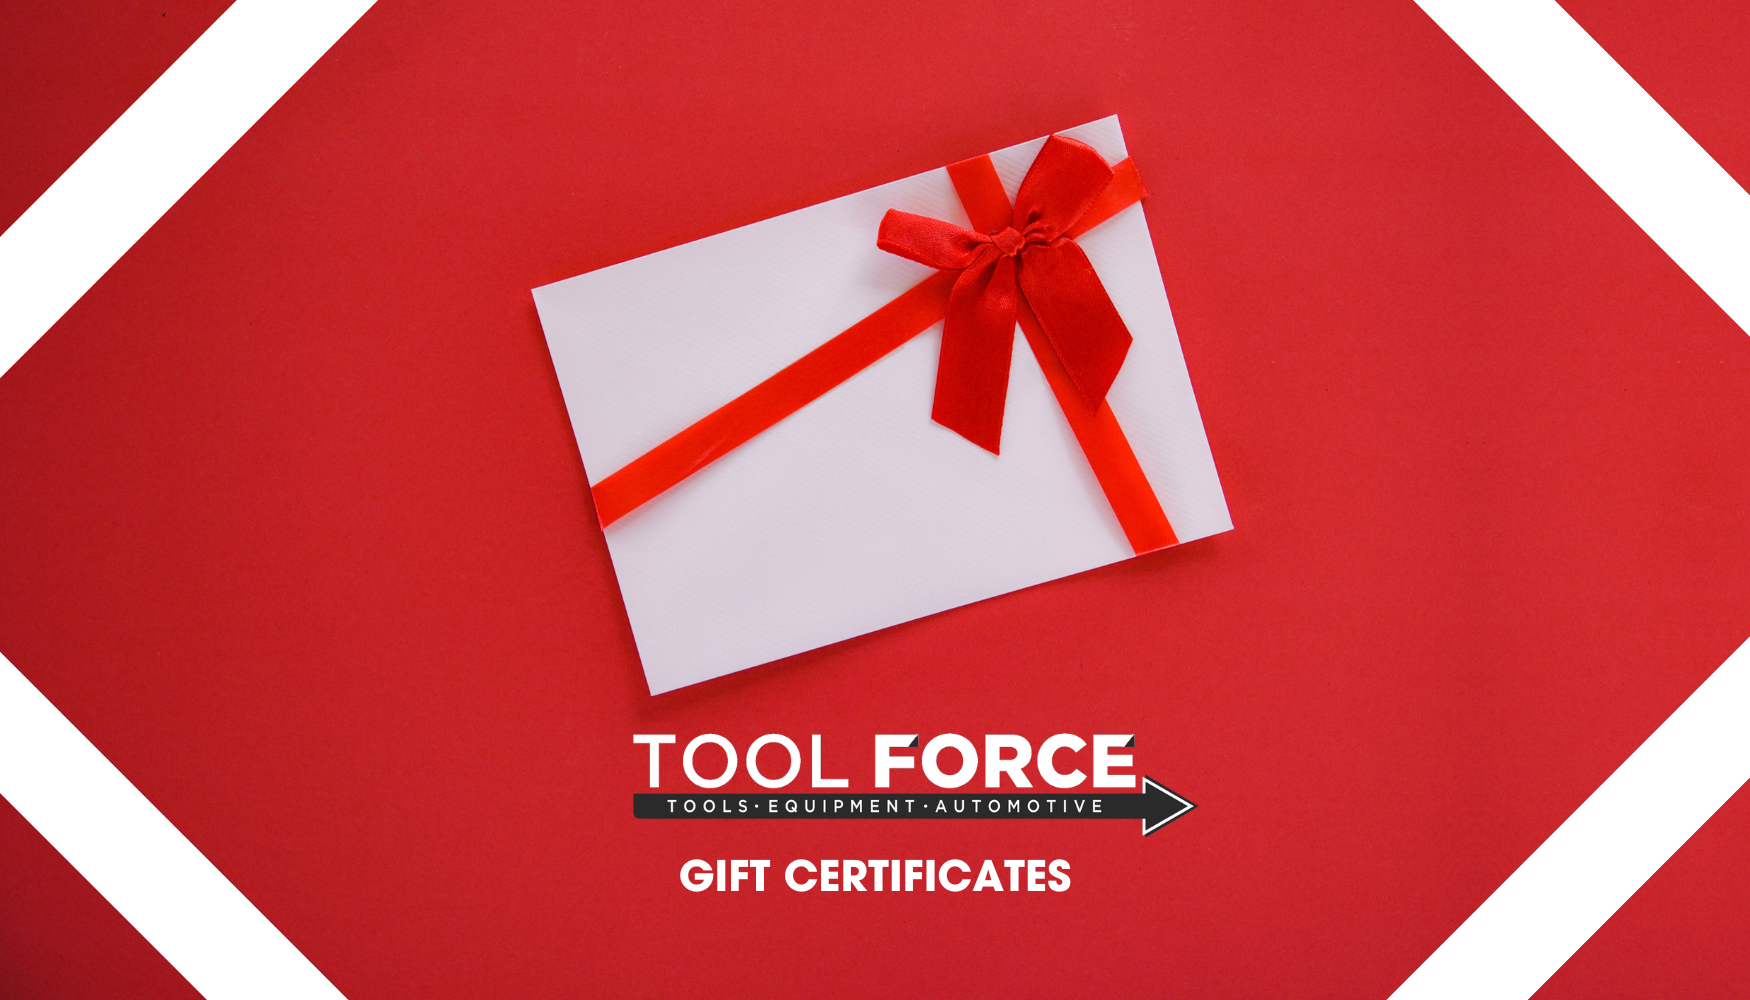 ToolForce Gift Certificates Available to buy